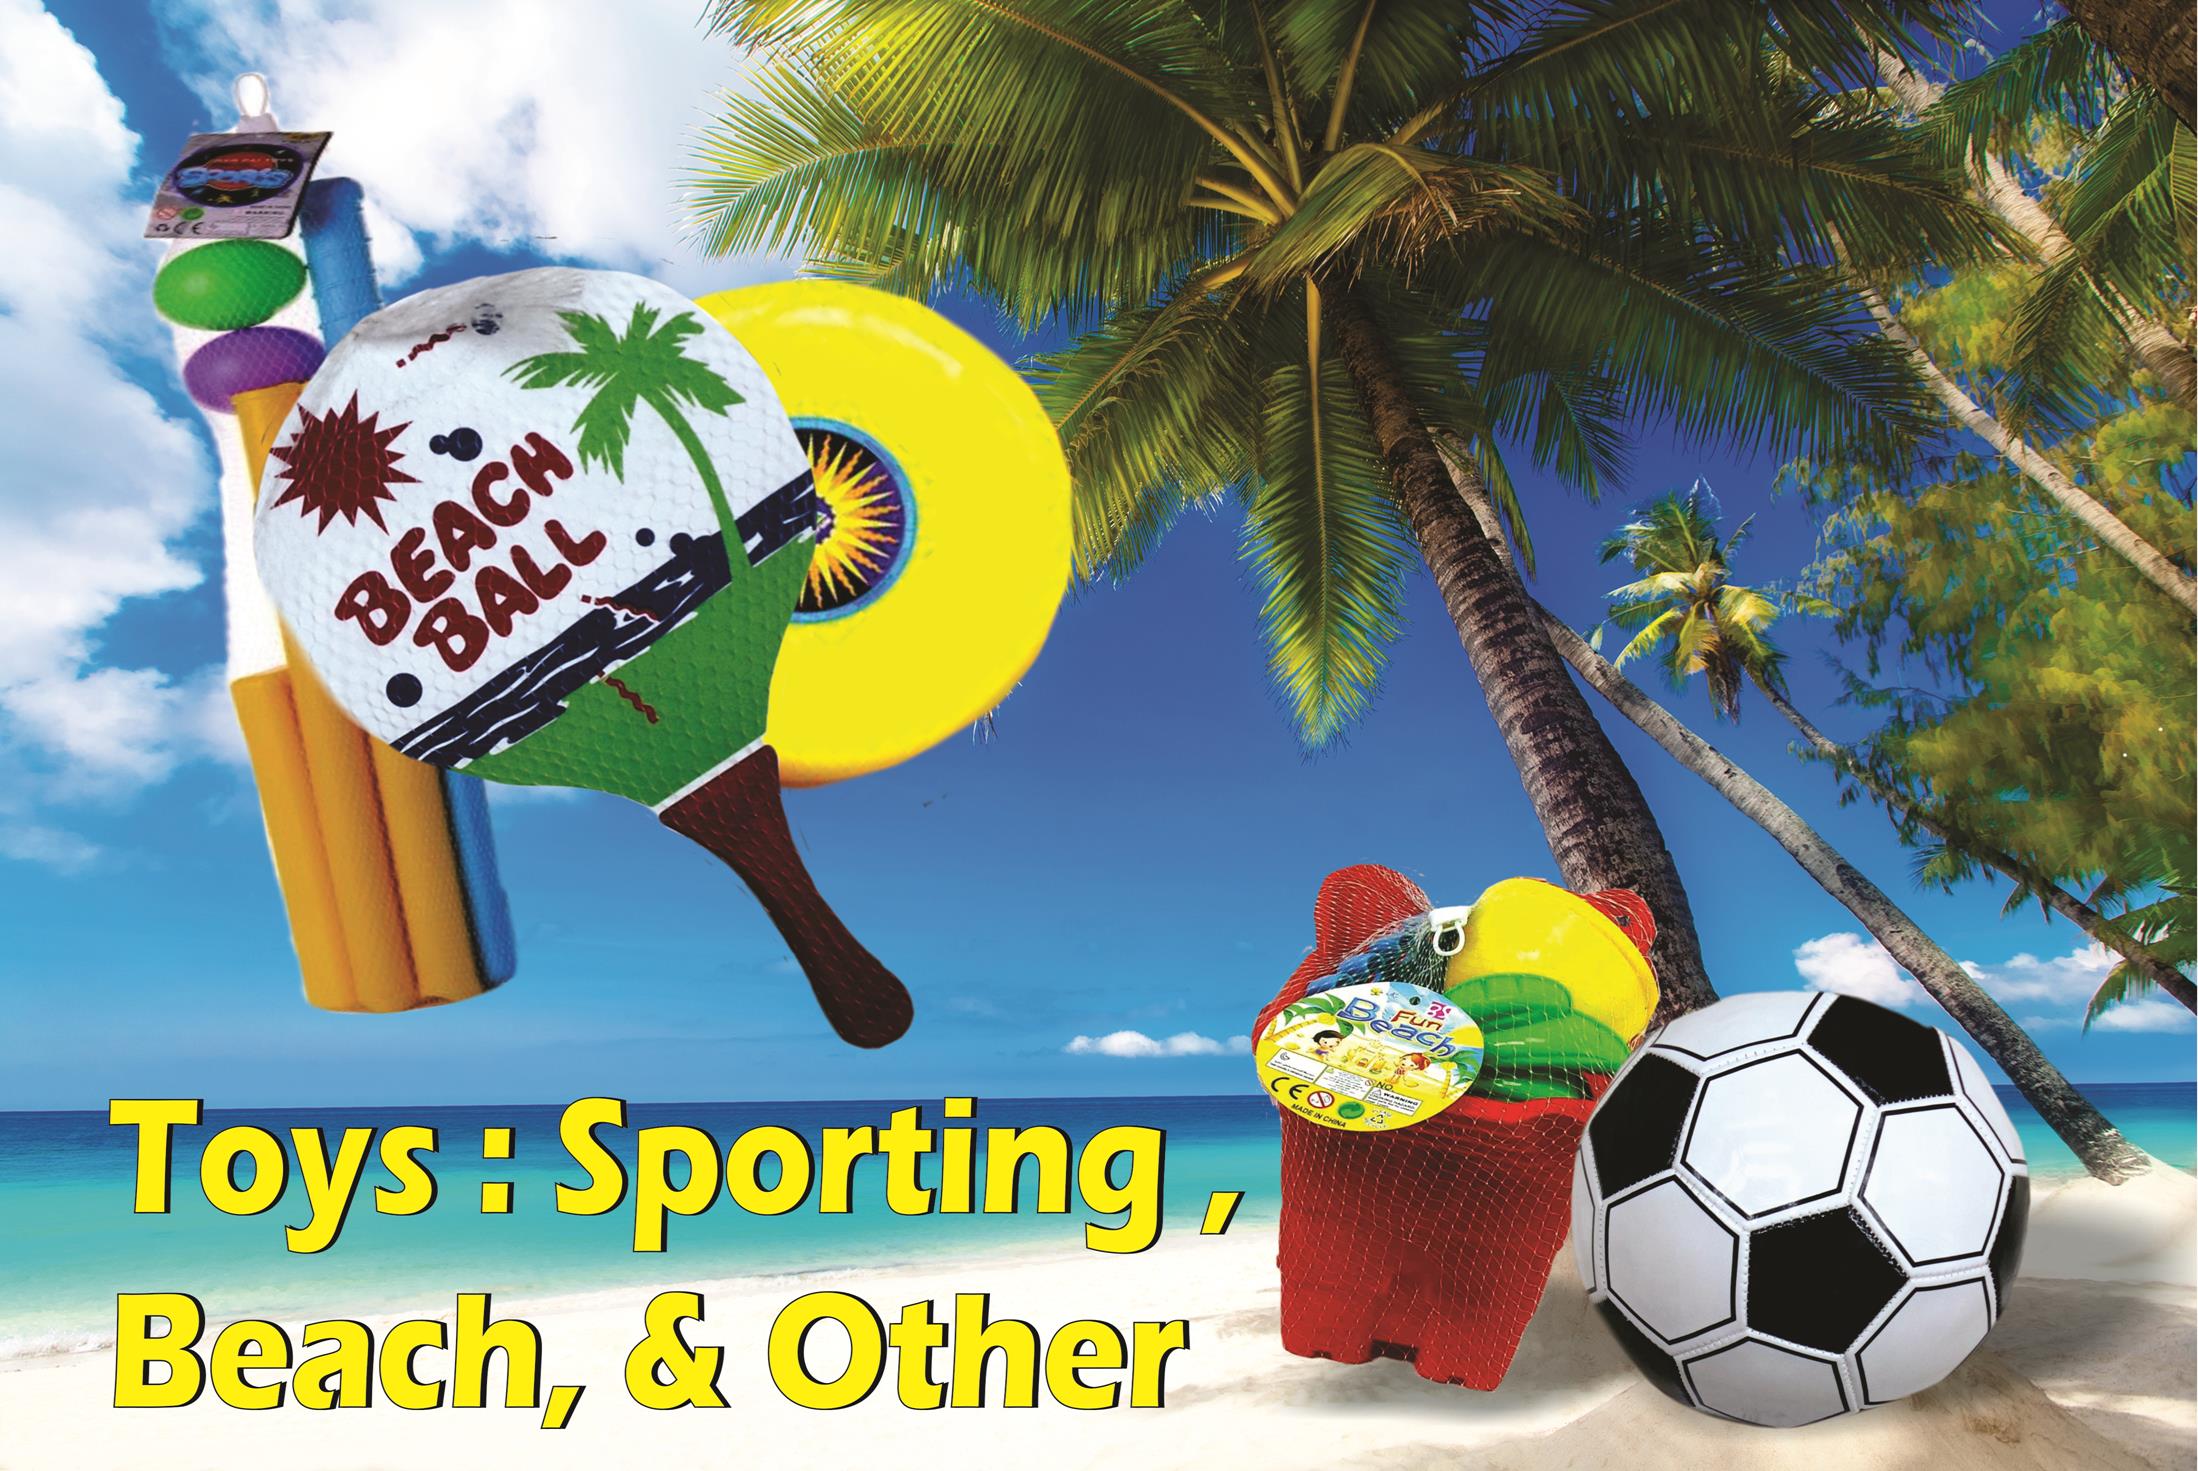 Toys Beach, Sporting & Other 